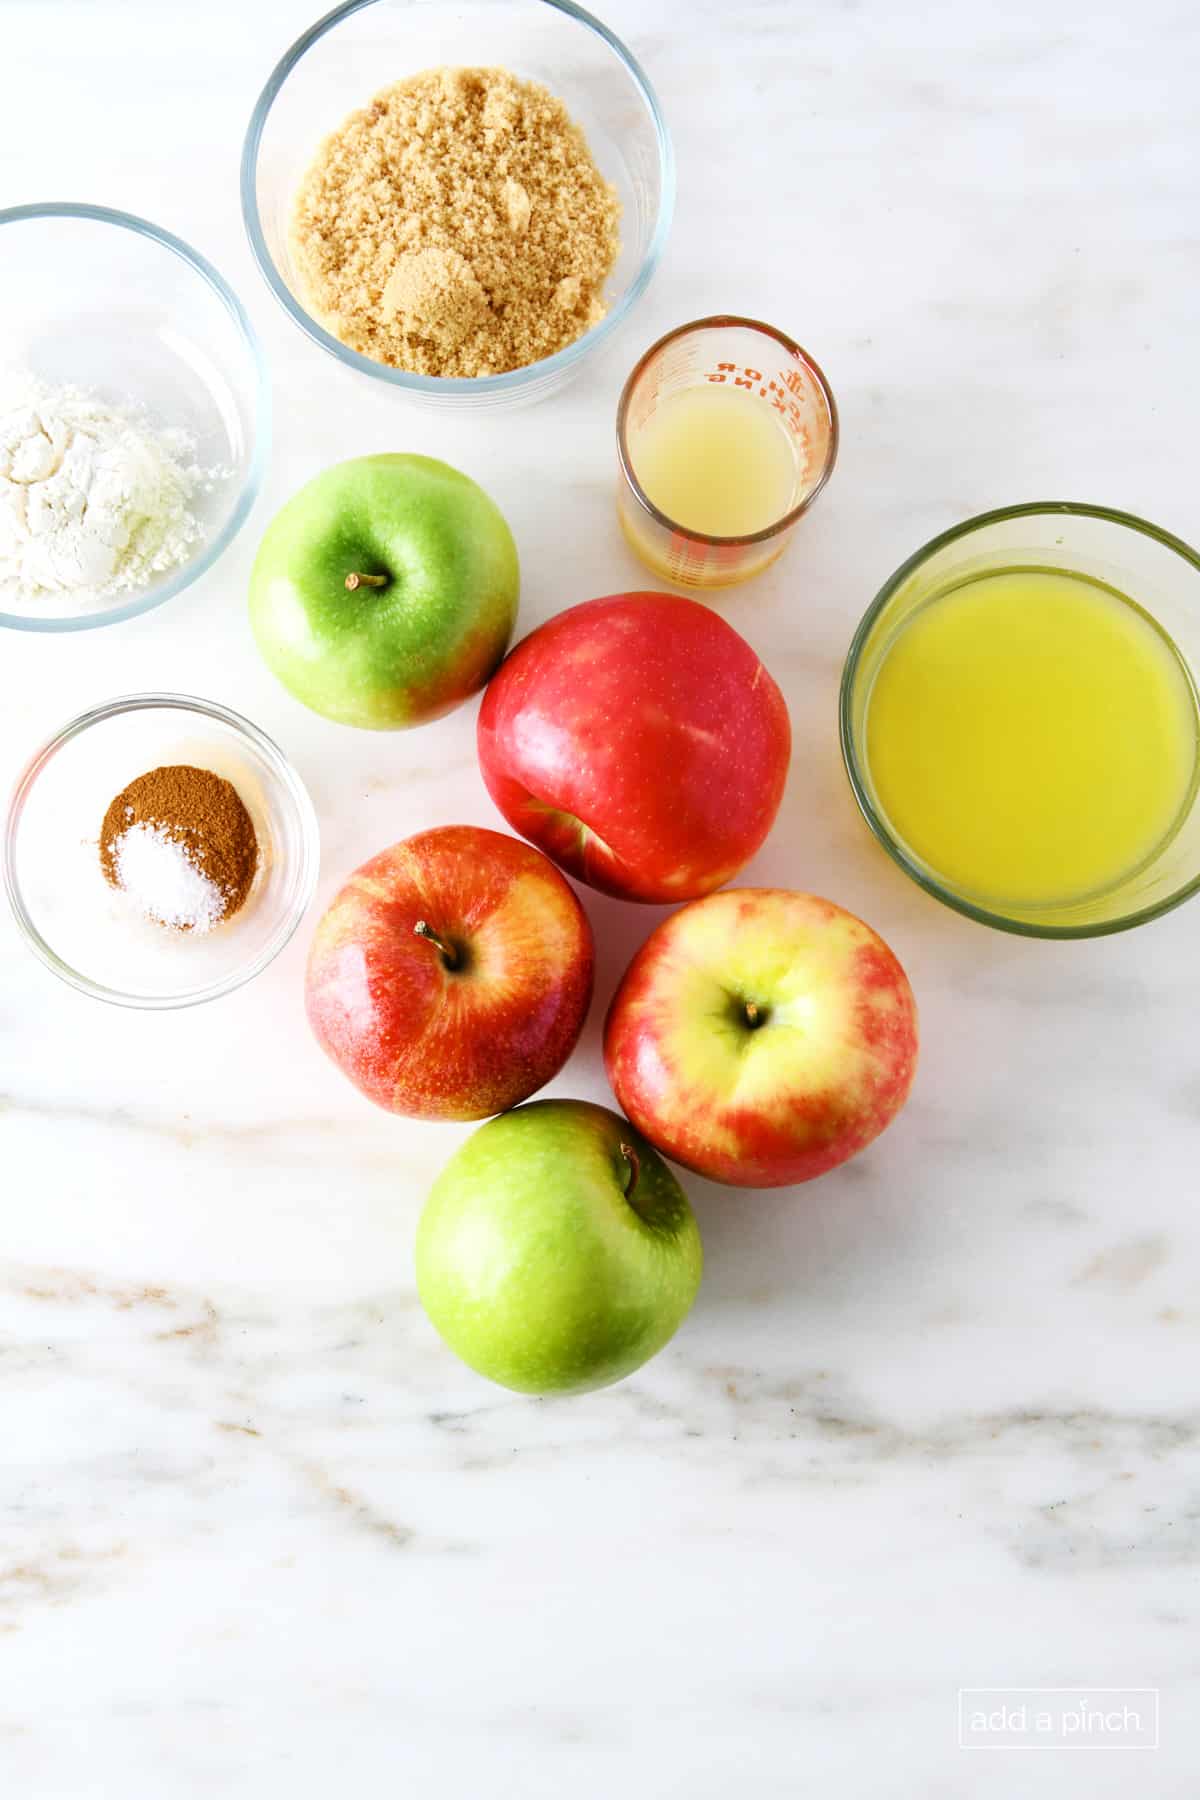 Ingredients used to make apple cobbler filling on a marble countertop.